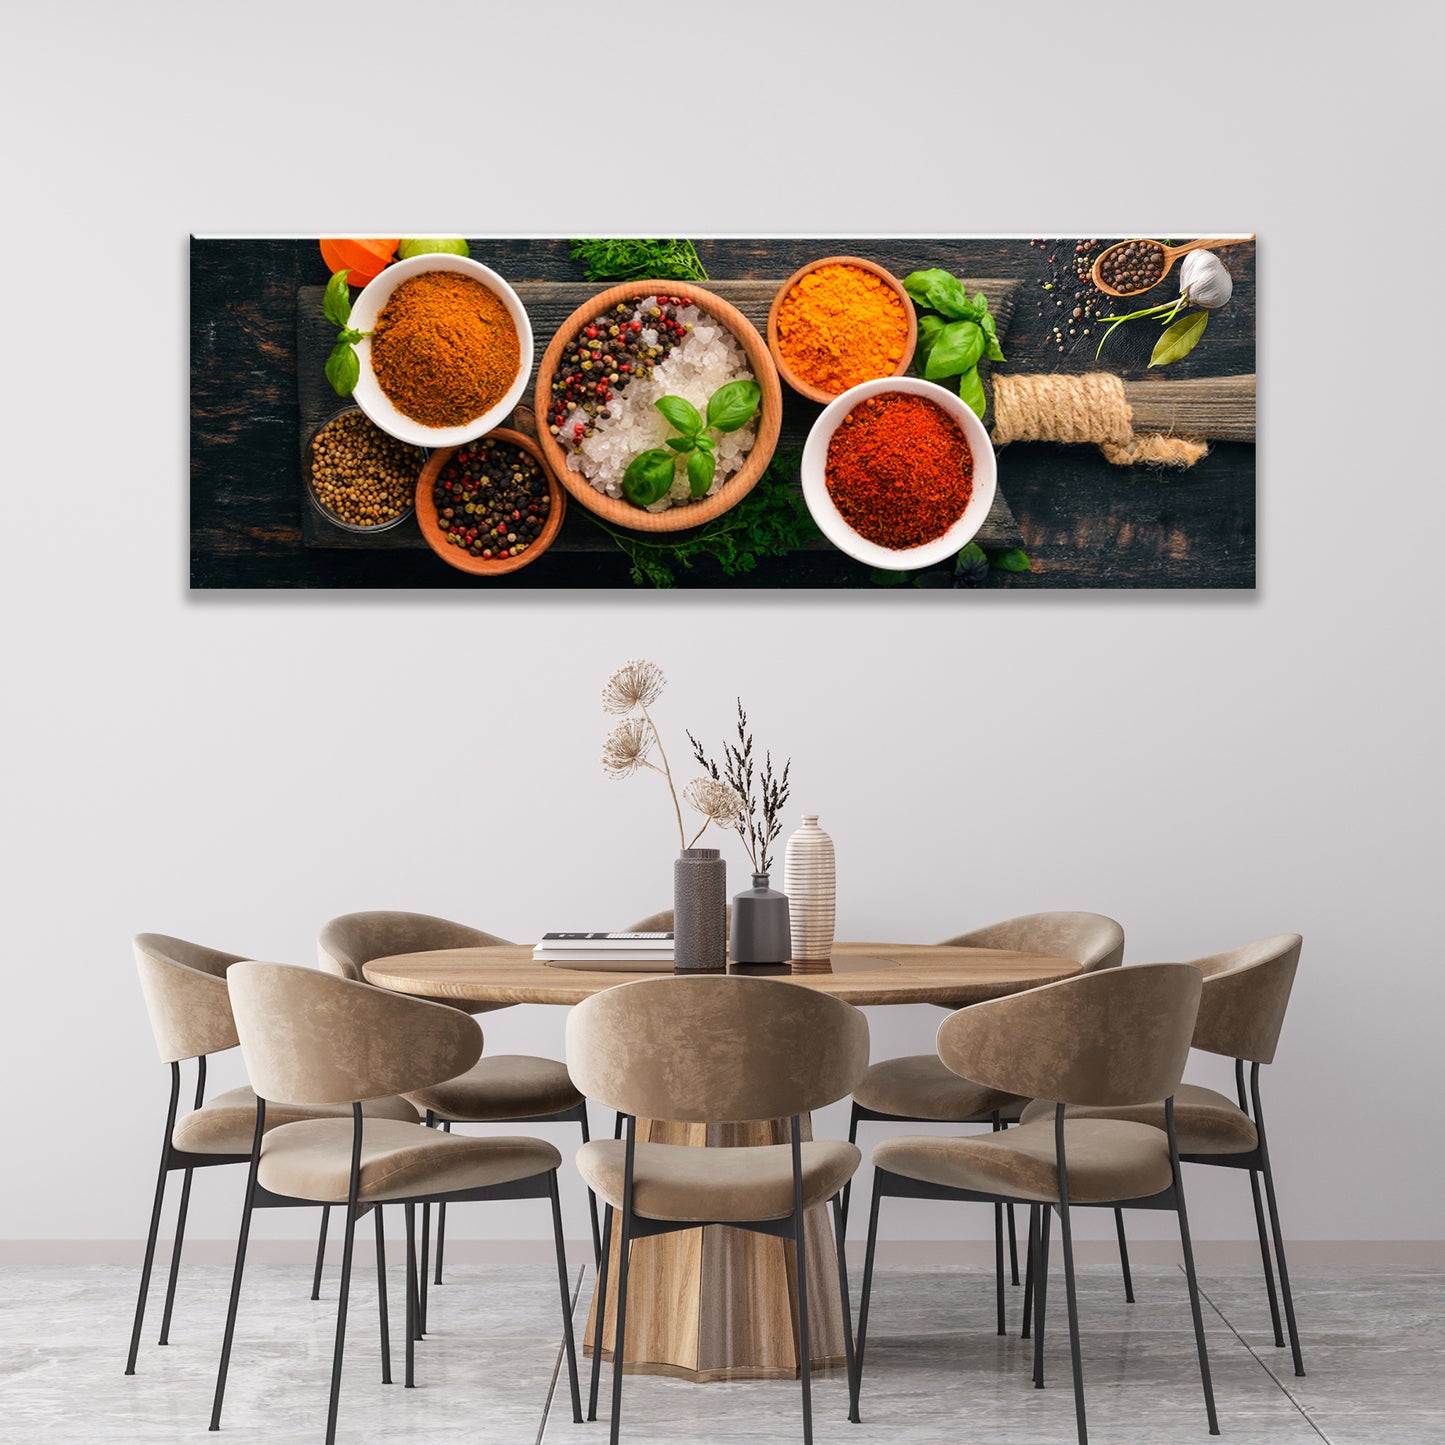 Herbs And Spices Canvas Wall Art Style 1 - Image by Tailored Canvases